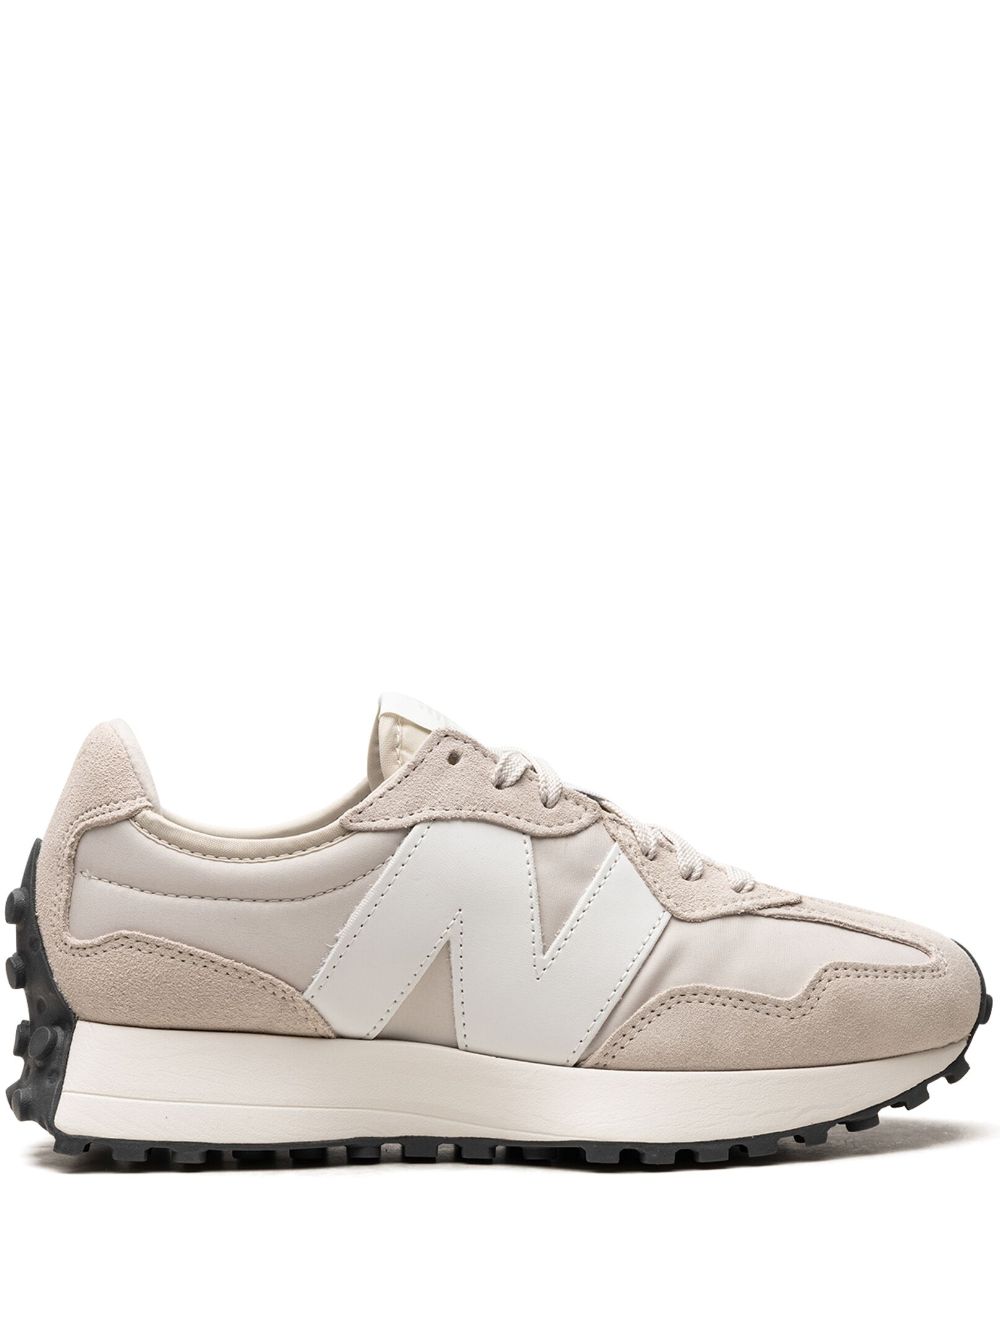 New Balance 327 "Off White White" sneakers - Neutrals